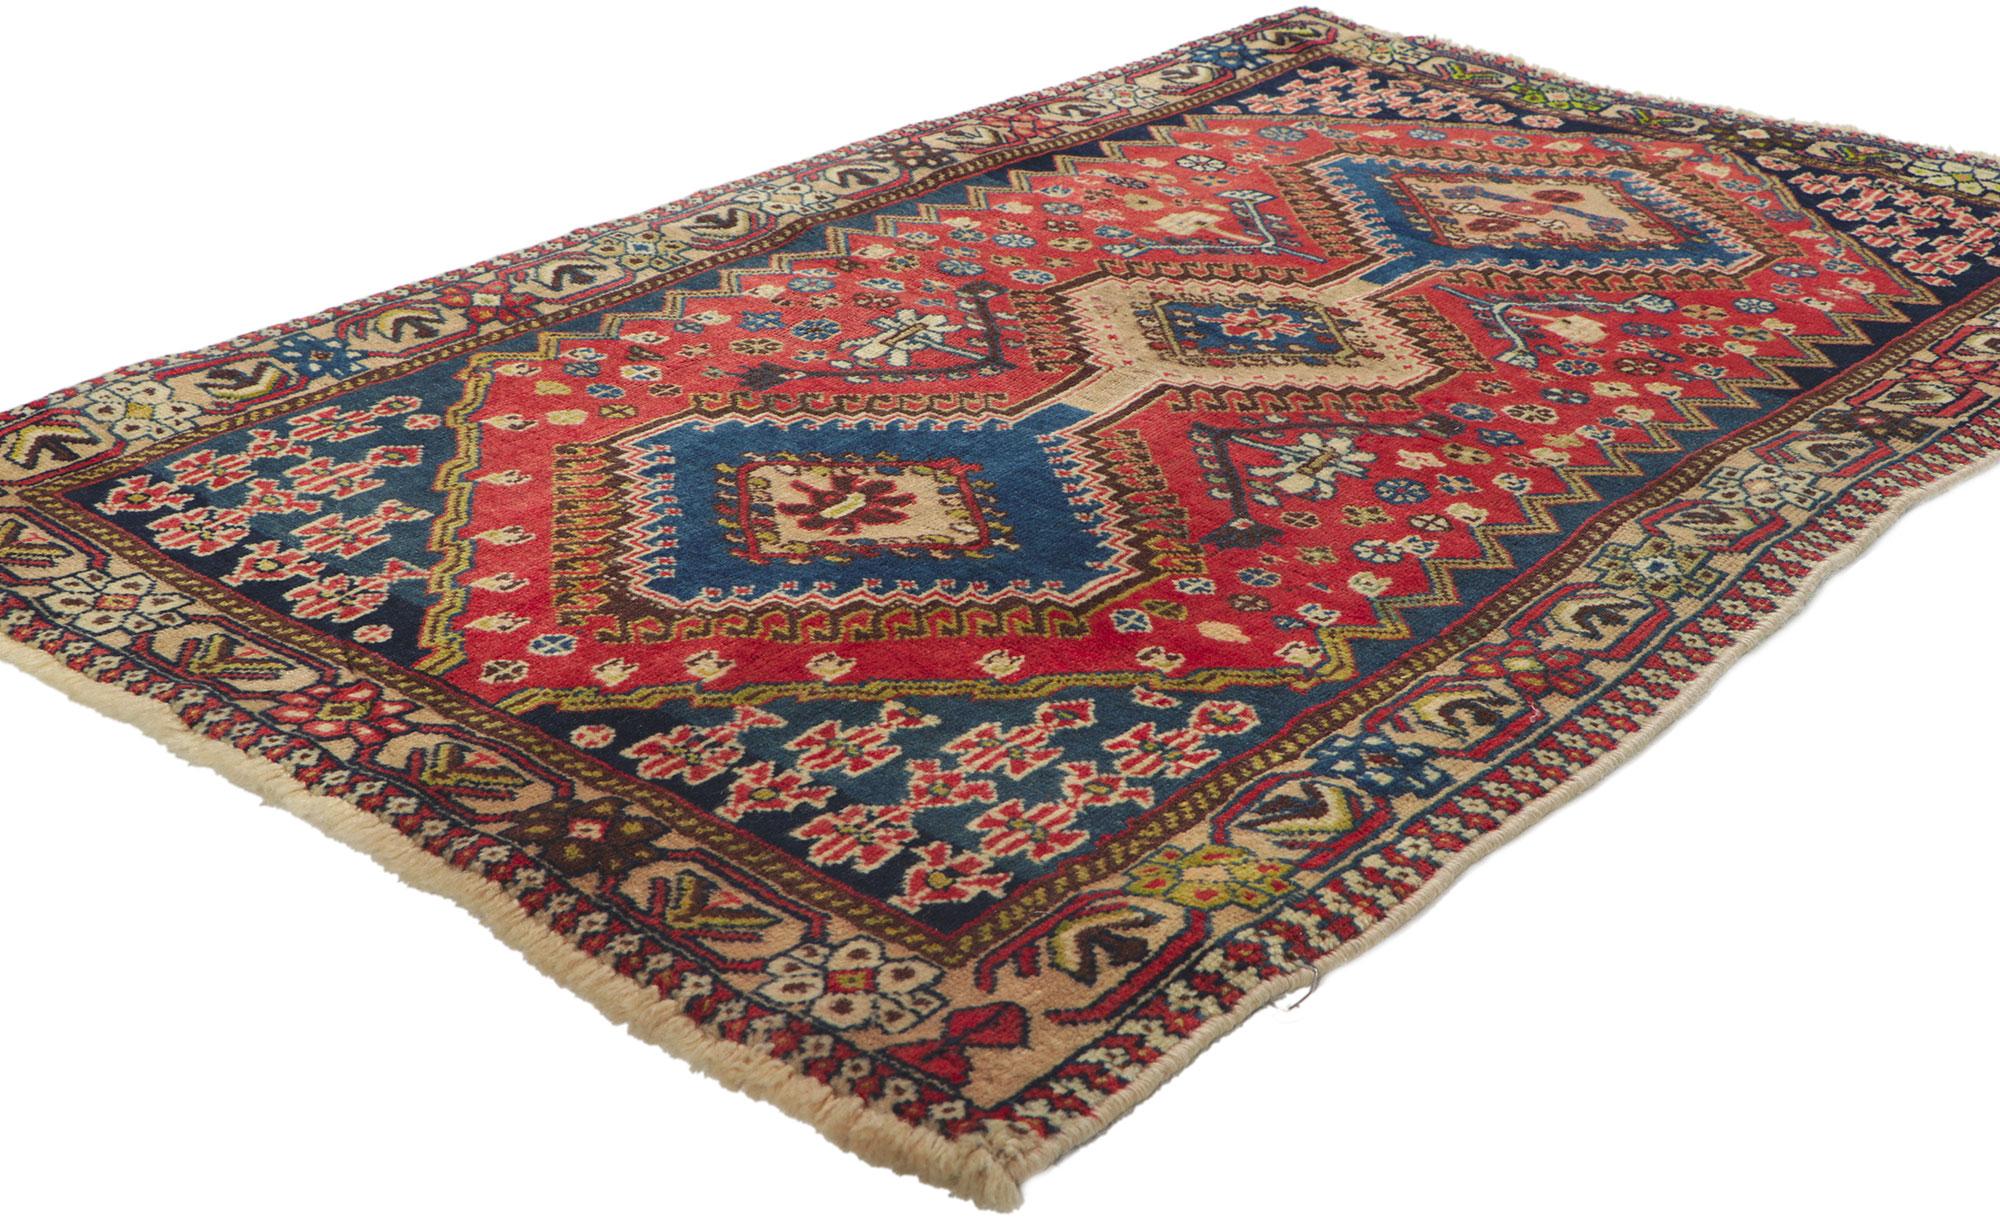 61131 Vintage Persian Shiraz Rug, 02'10 x 04'06. Full of tiny details and nomadic charm, this hand knotted wool vintage Persian Shiraz rug is a captivating vision of woven beauty. The eye-catching tribal design and lively colorway woven into this